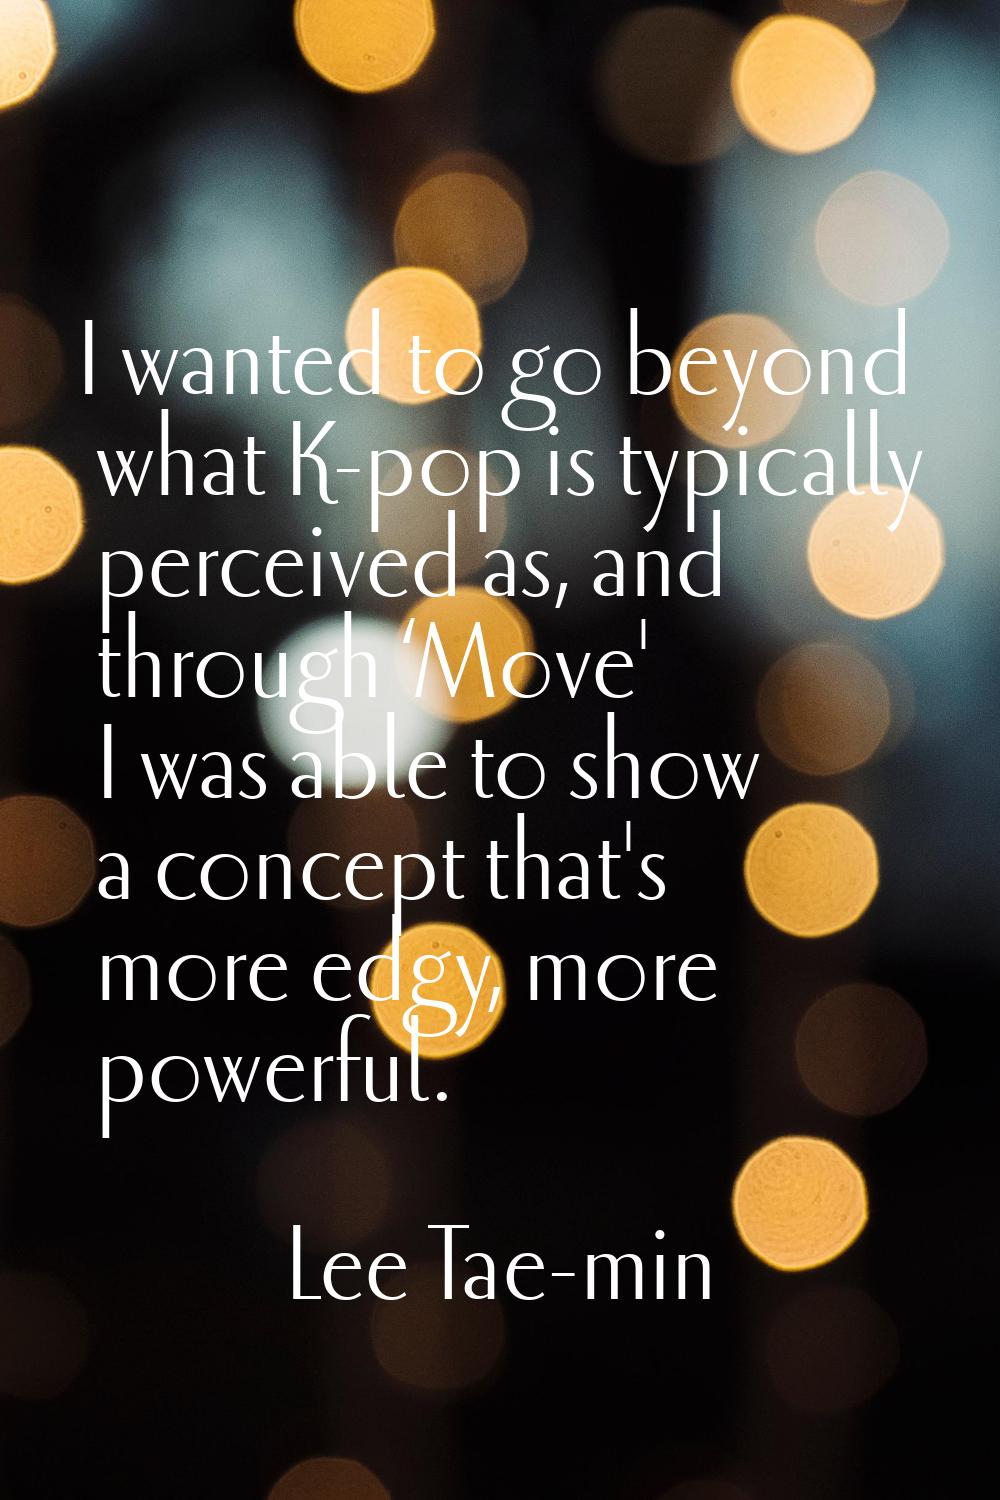 I wanted to go beyond what K-pop is typically perceived as, and through ‘Move' I was able to show a